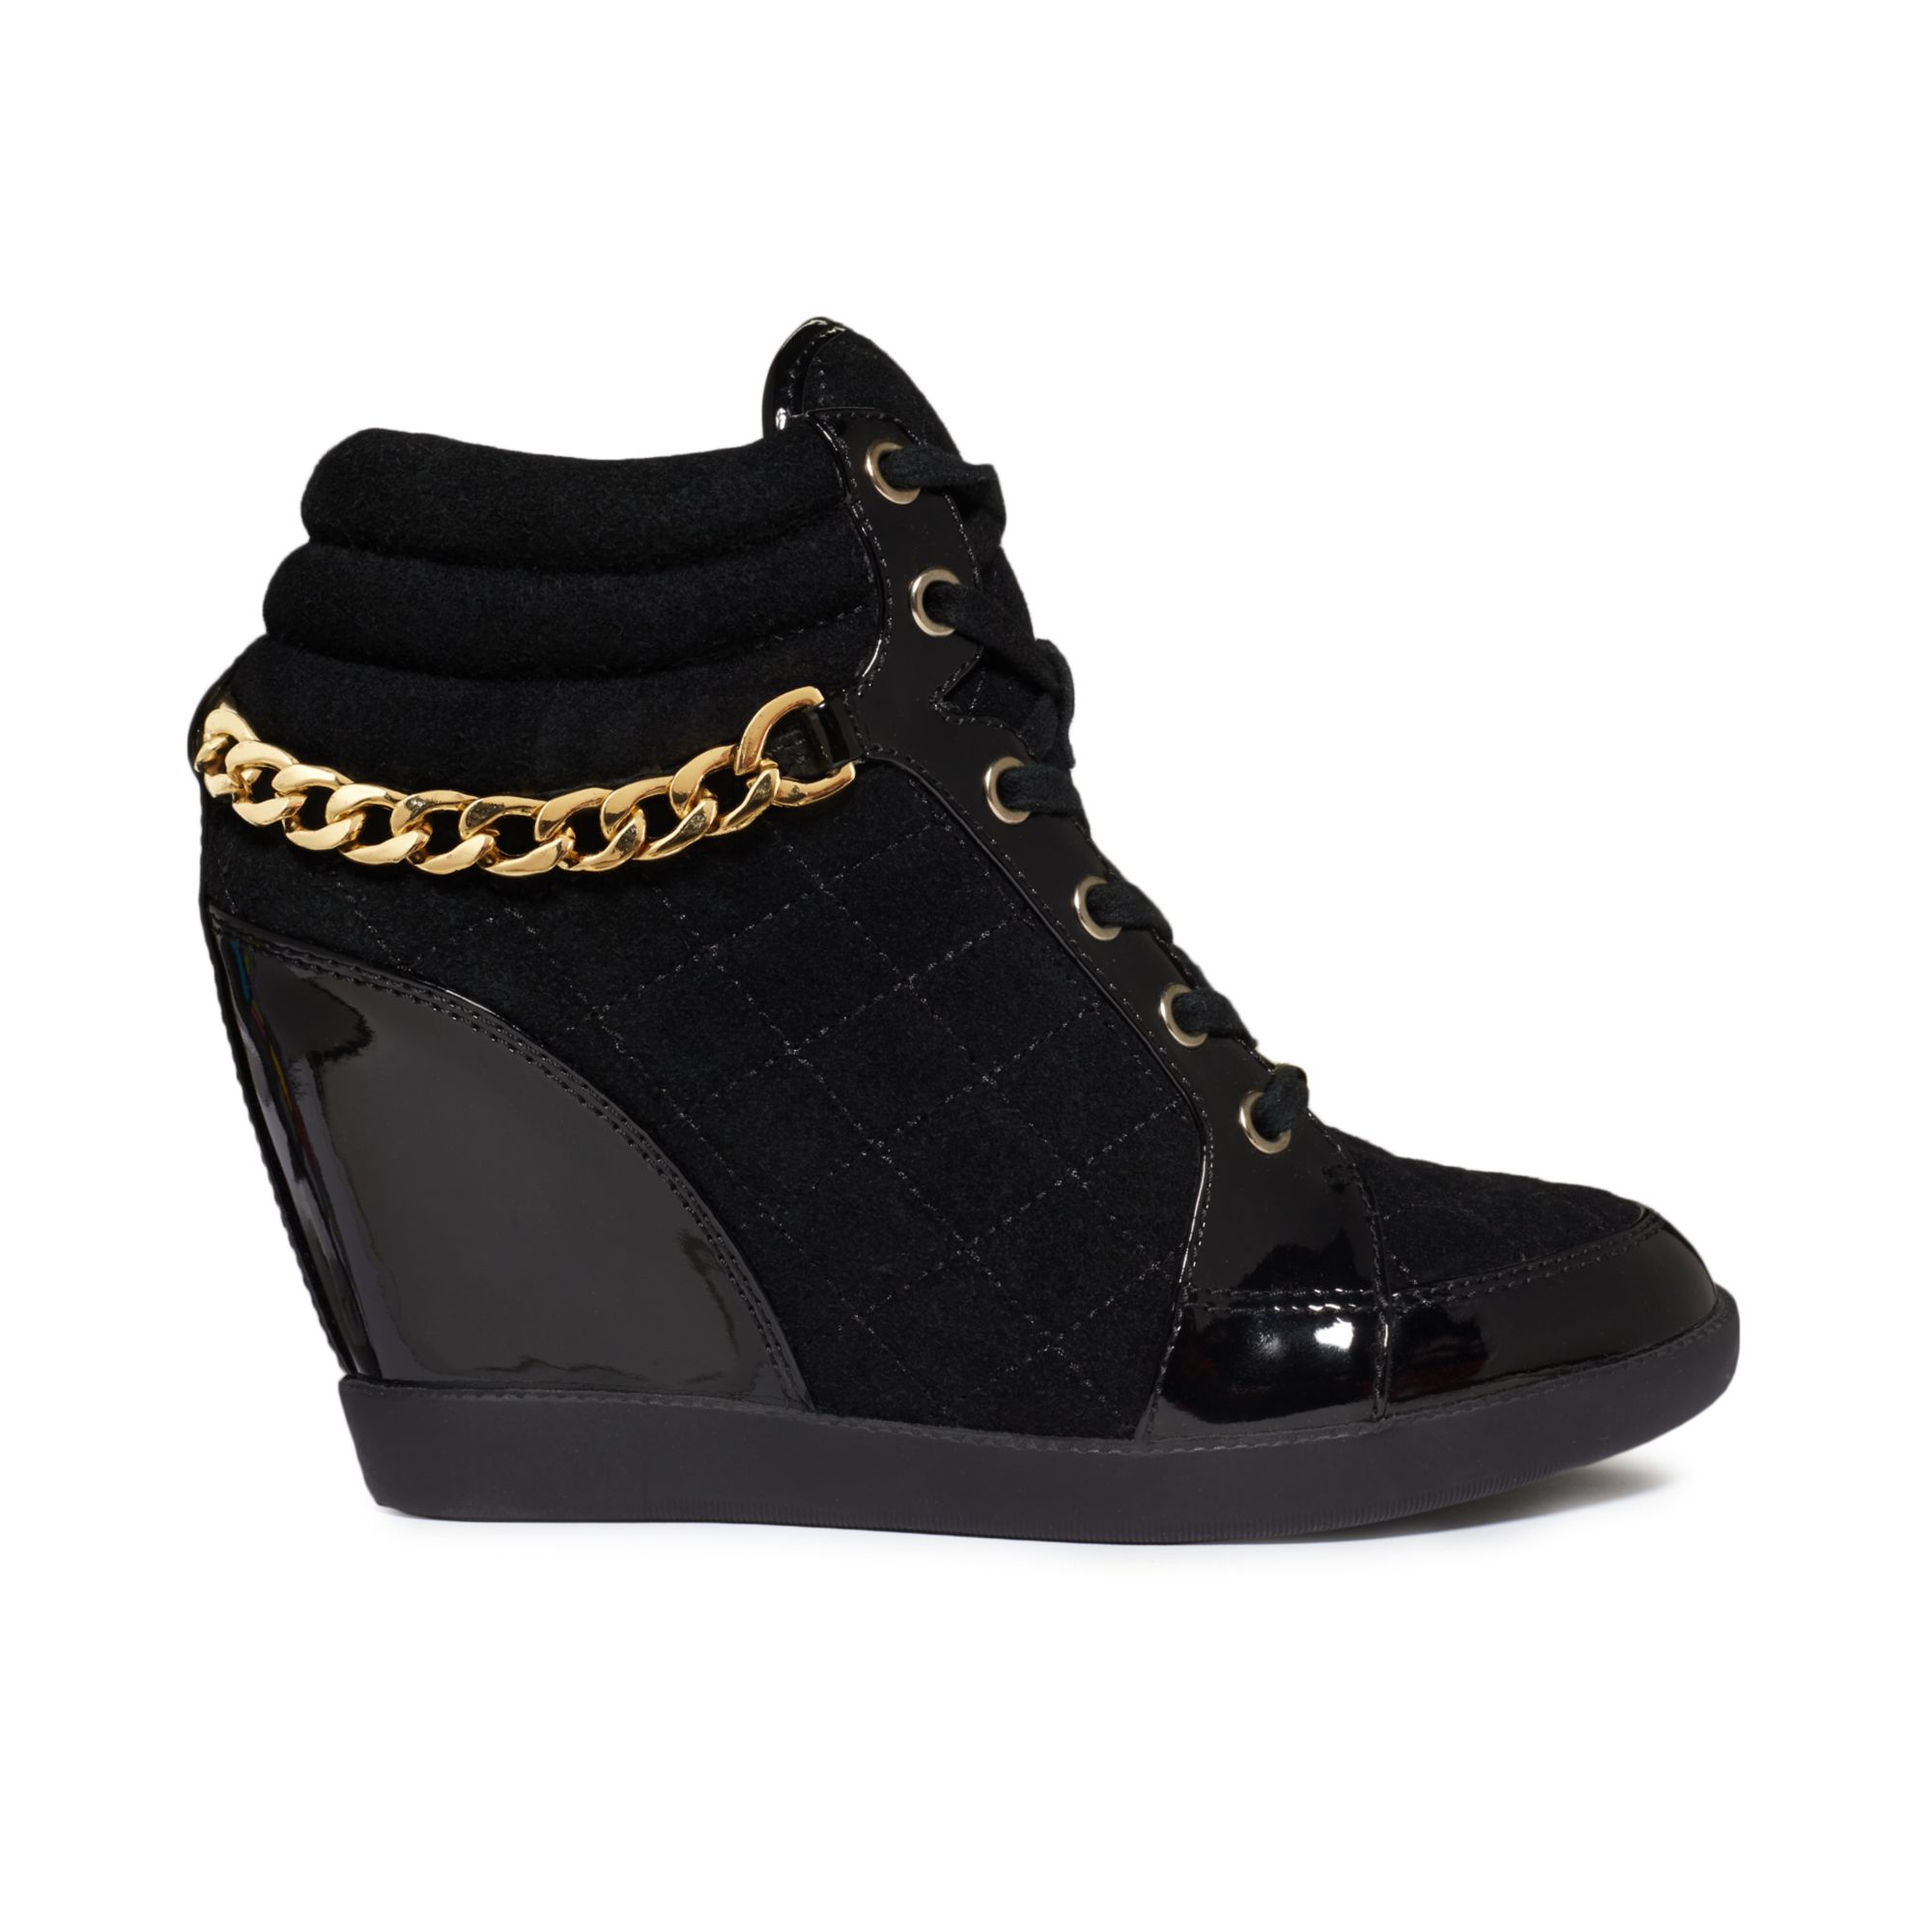 Guess Womens Shoes Hevin Quilted Wedge Sneakers in Black - Lyst